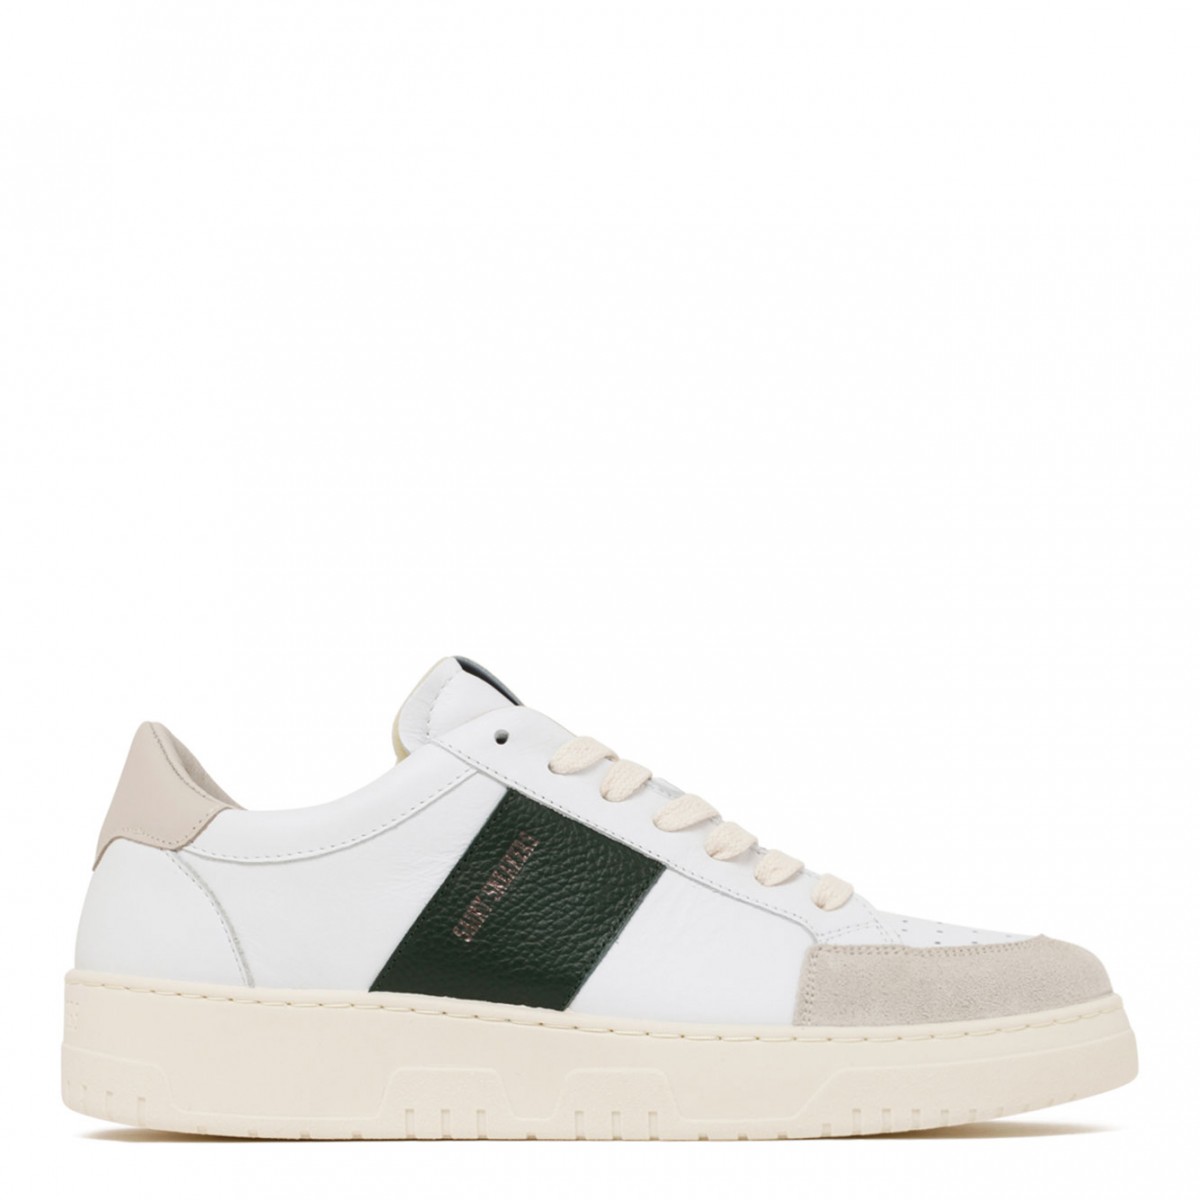 White and Olive Sail W Sneakers